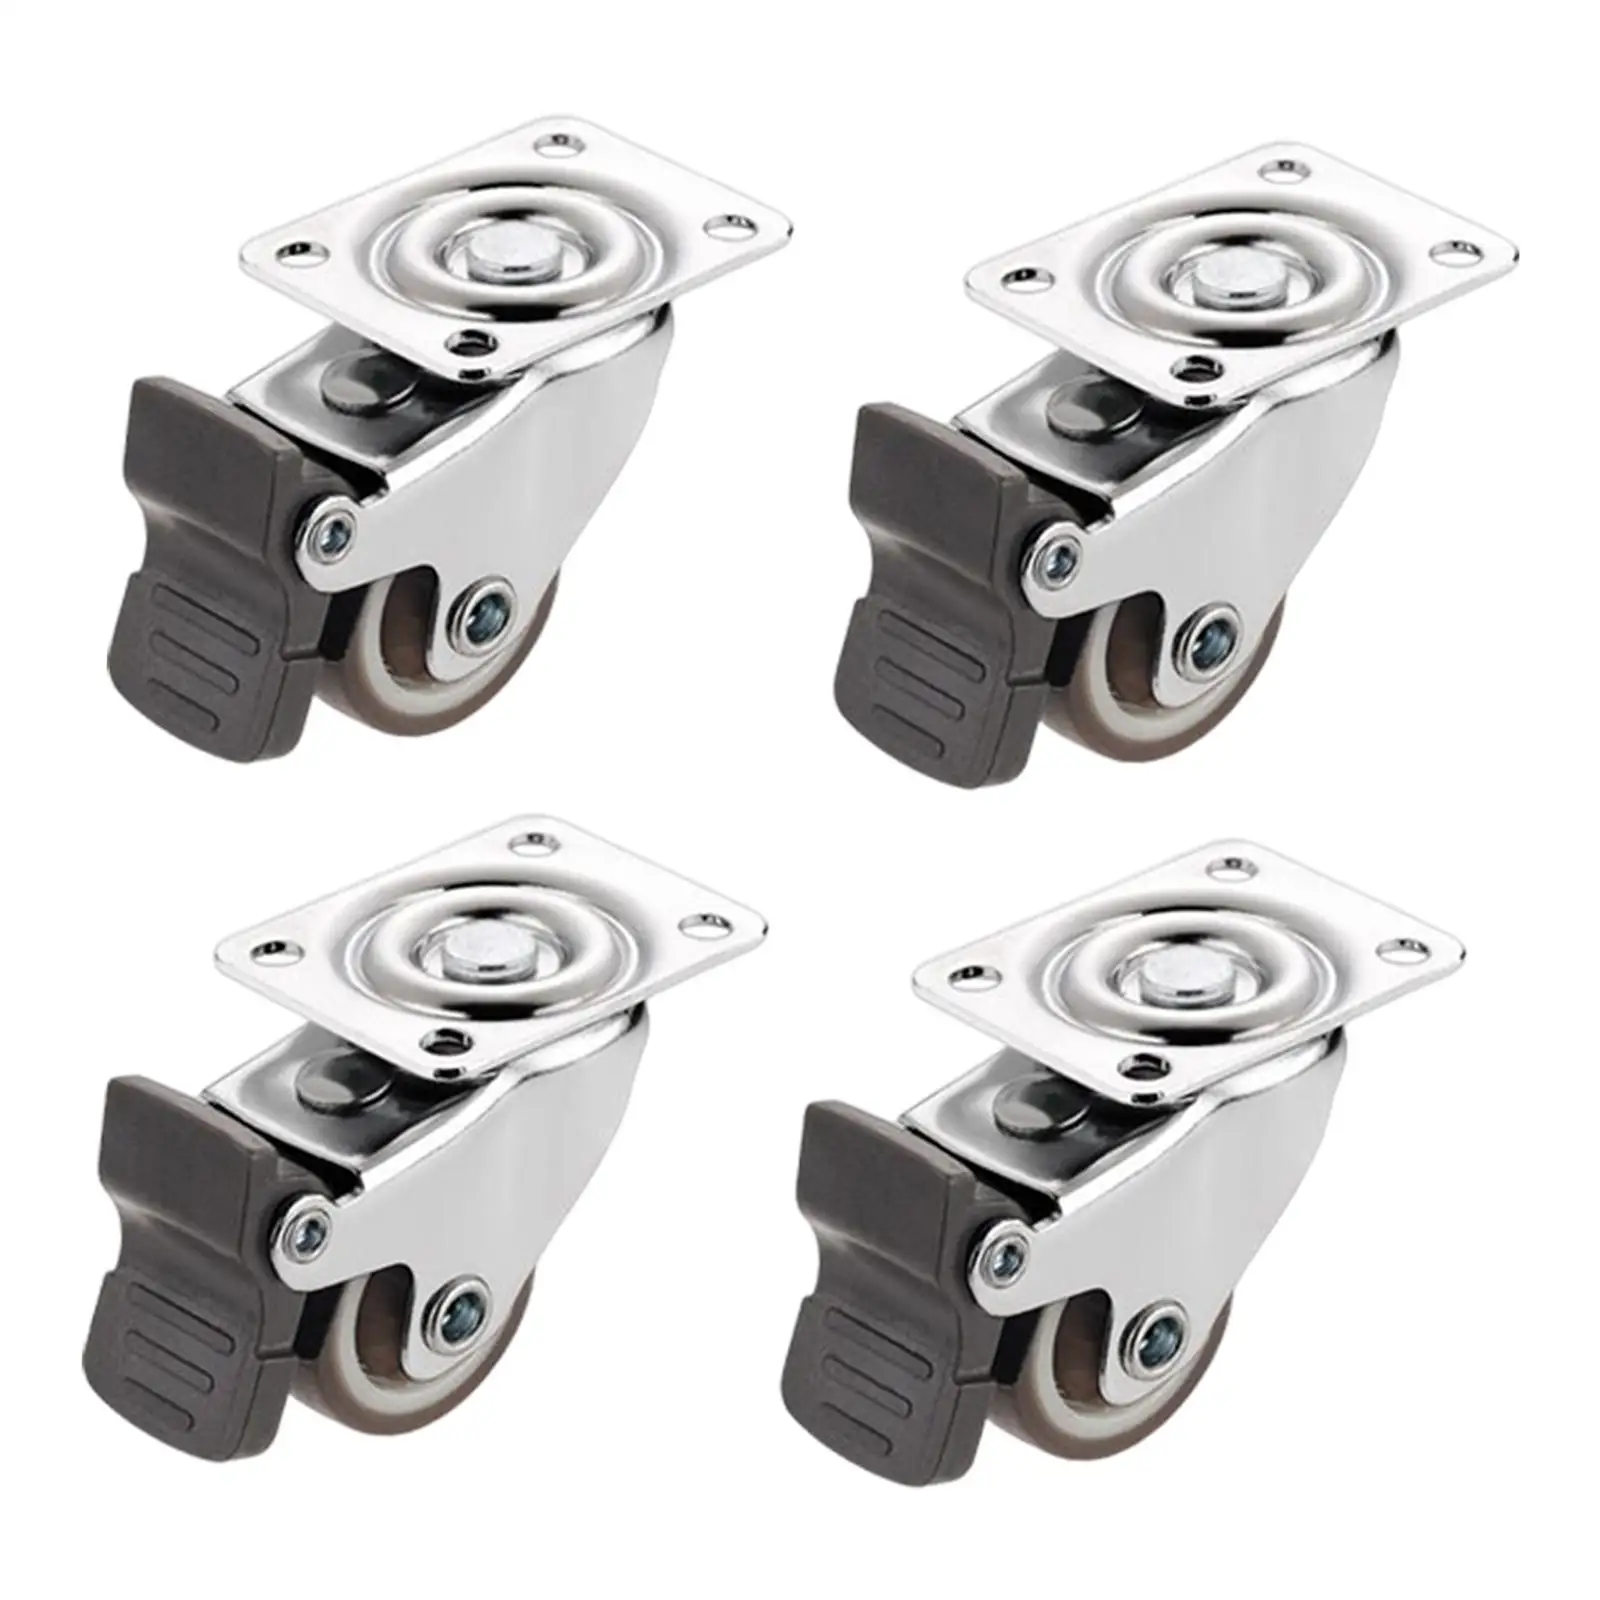 4 Pieces Swivel Caster Furniture Caster Universal Caster Wheel Roller Wheel for Cart Cabinet Chair Furniture Cupboard